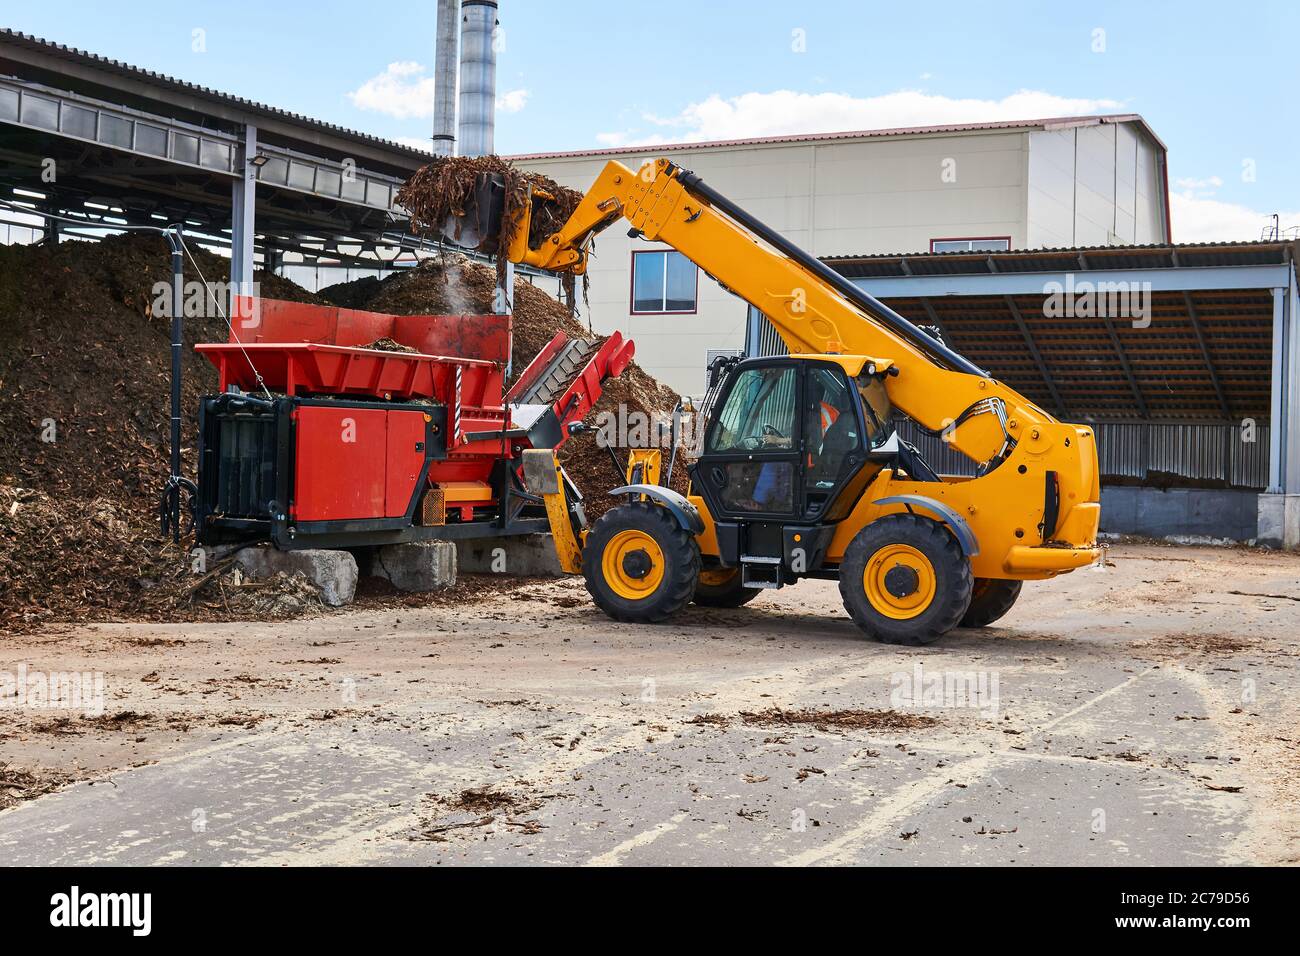 bucket loader loads wood bark into an industrial woodchipper in a woodworking industry Stock Photo